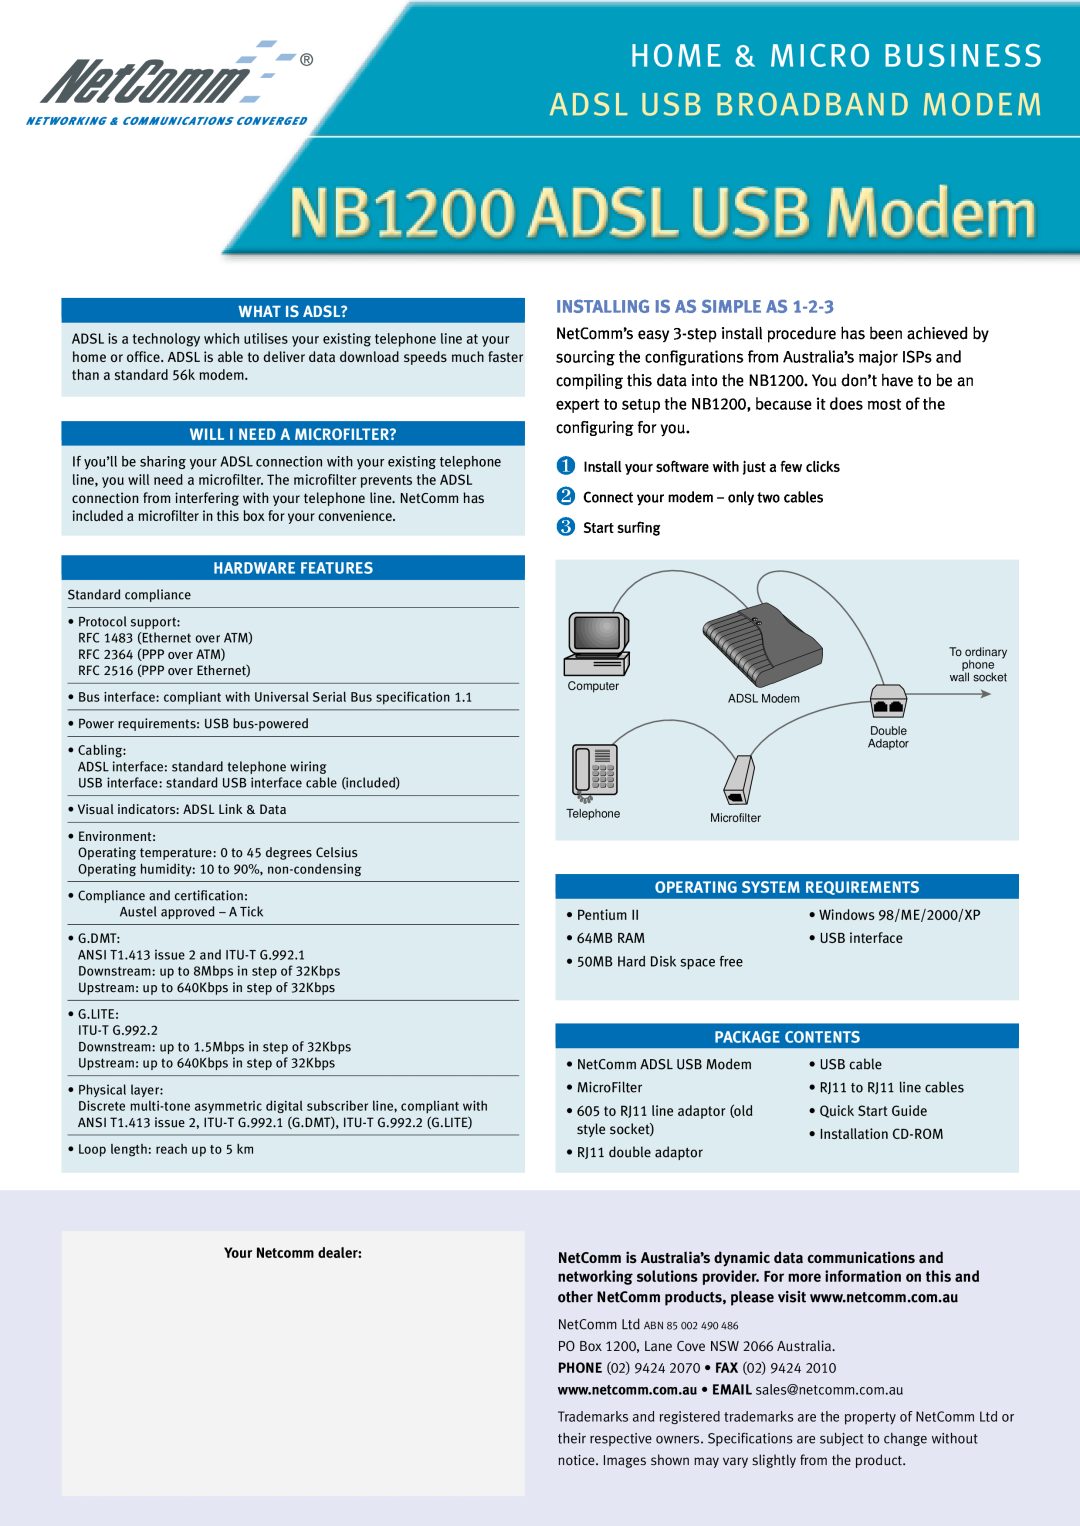 NetComm NB1200 warranty Installing Is As Simple As, Home & Micro Business, Adsl Usb Broadband Modem, What Is Adsl? 